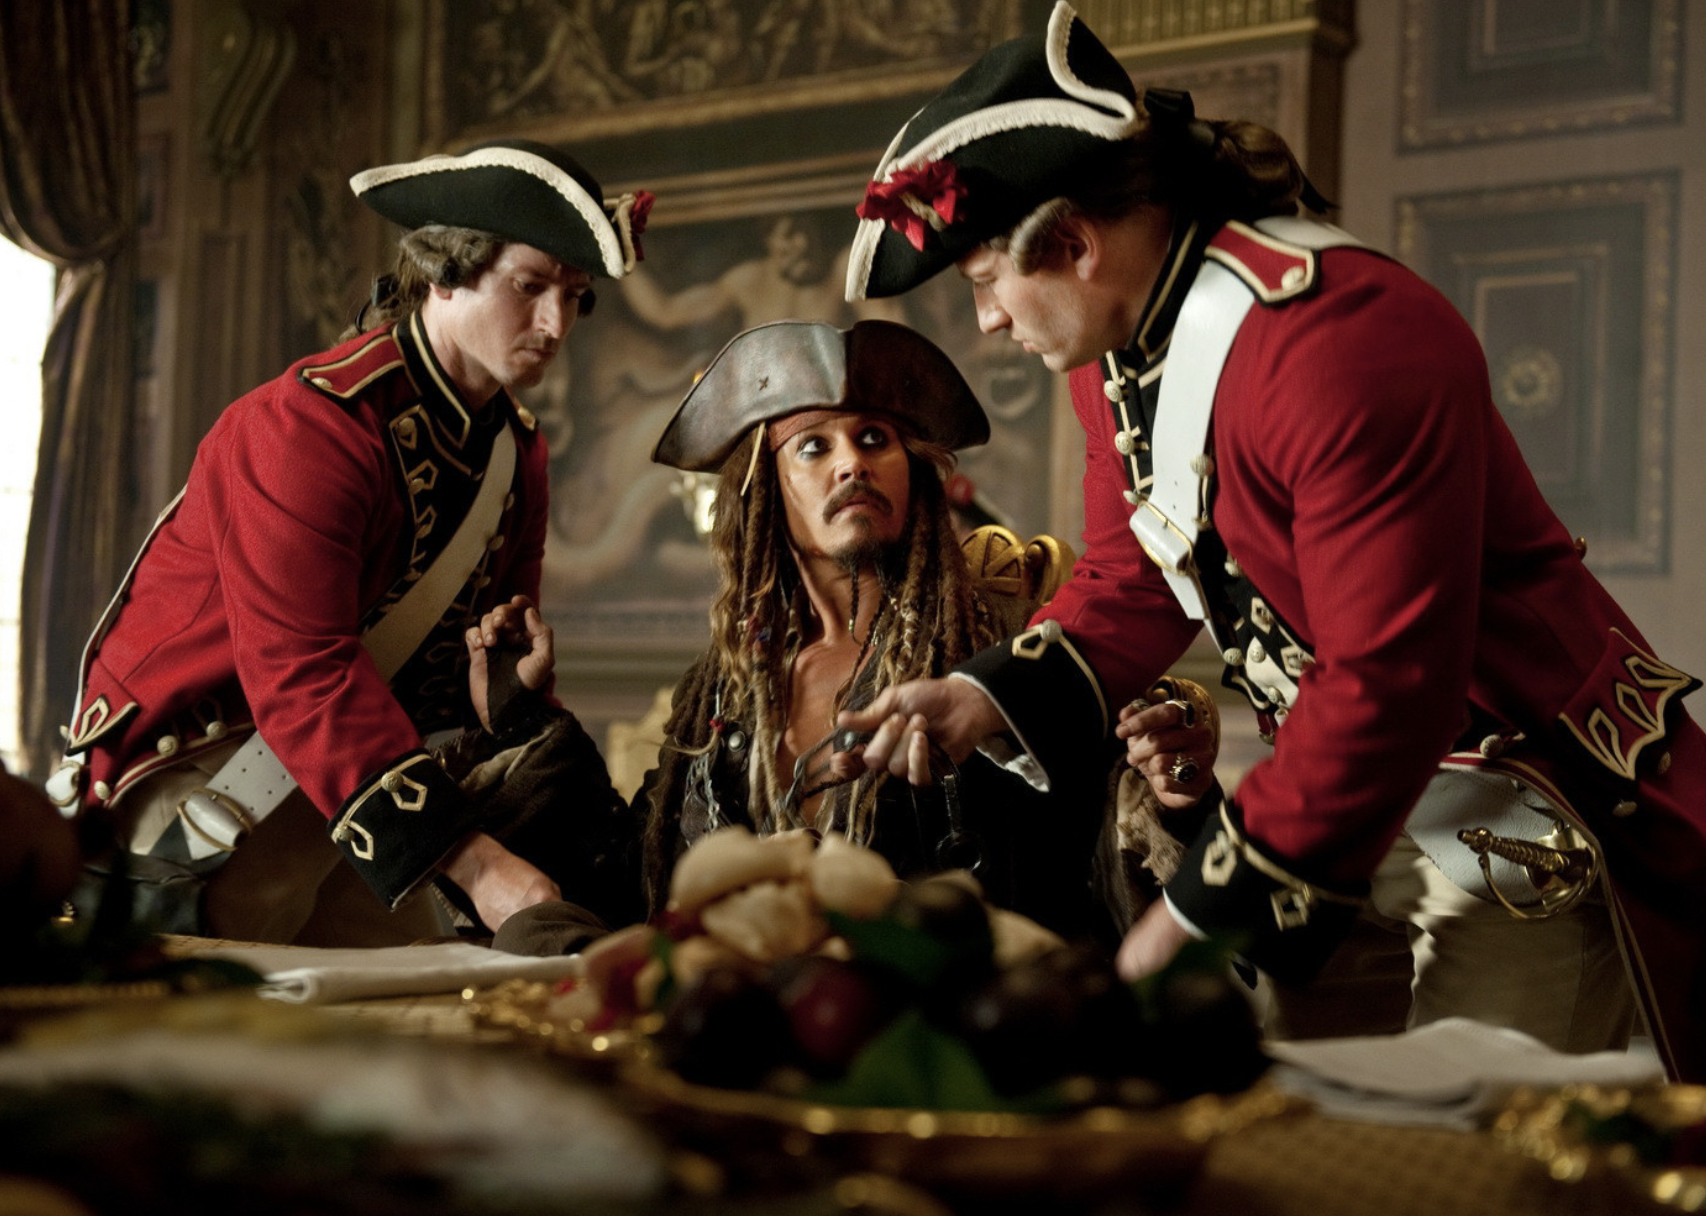 Johnny Depp in a scene from "Pirates of the Caribbean: On Stranger Tides"